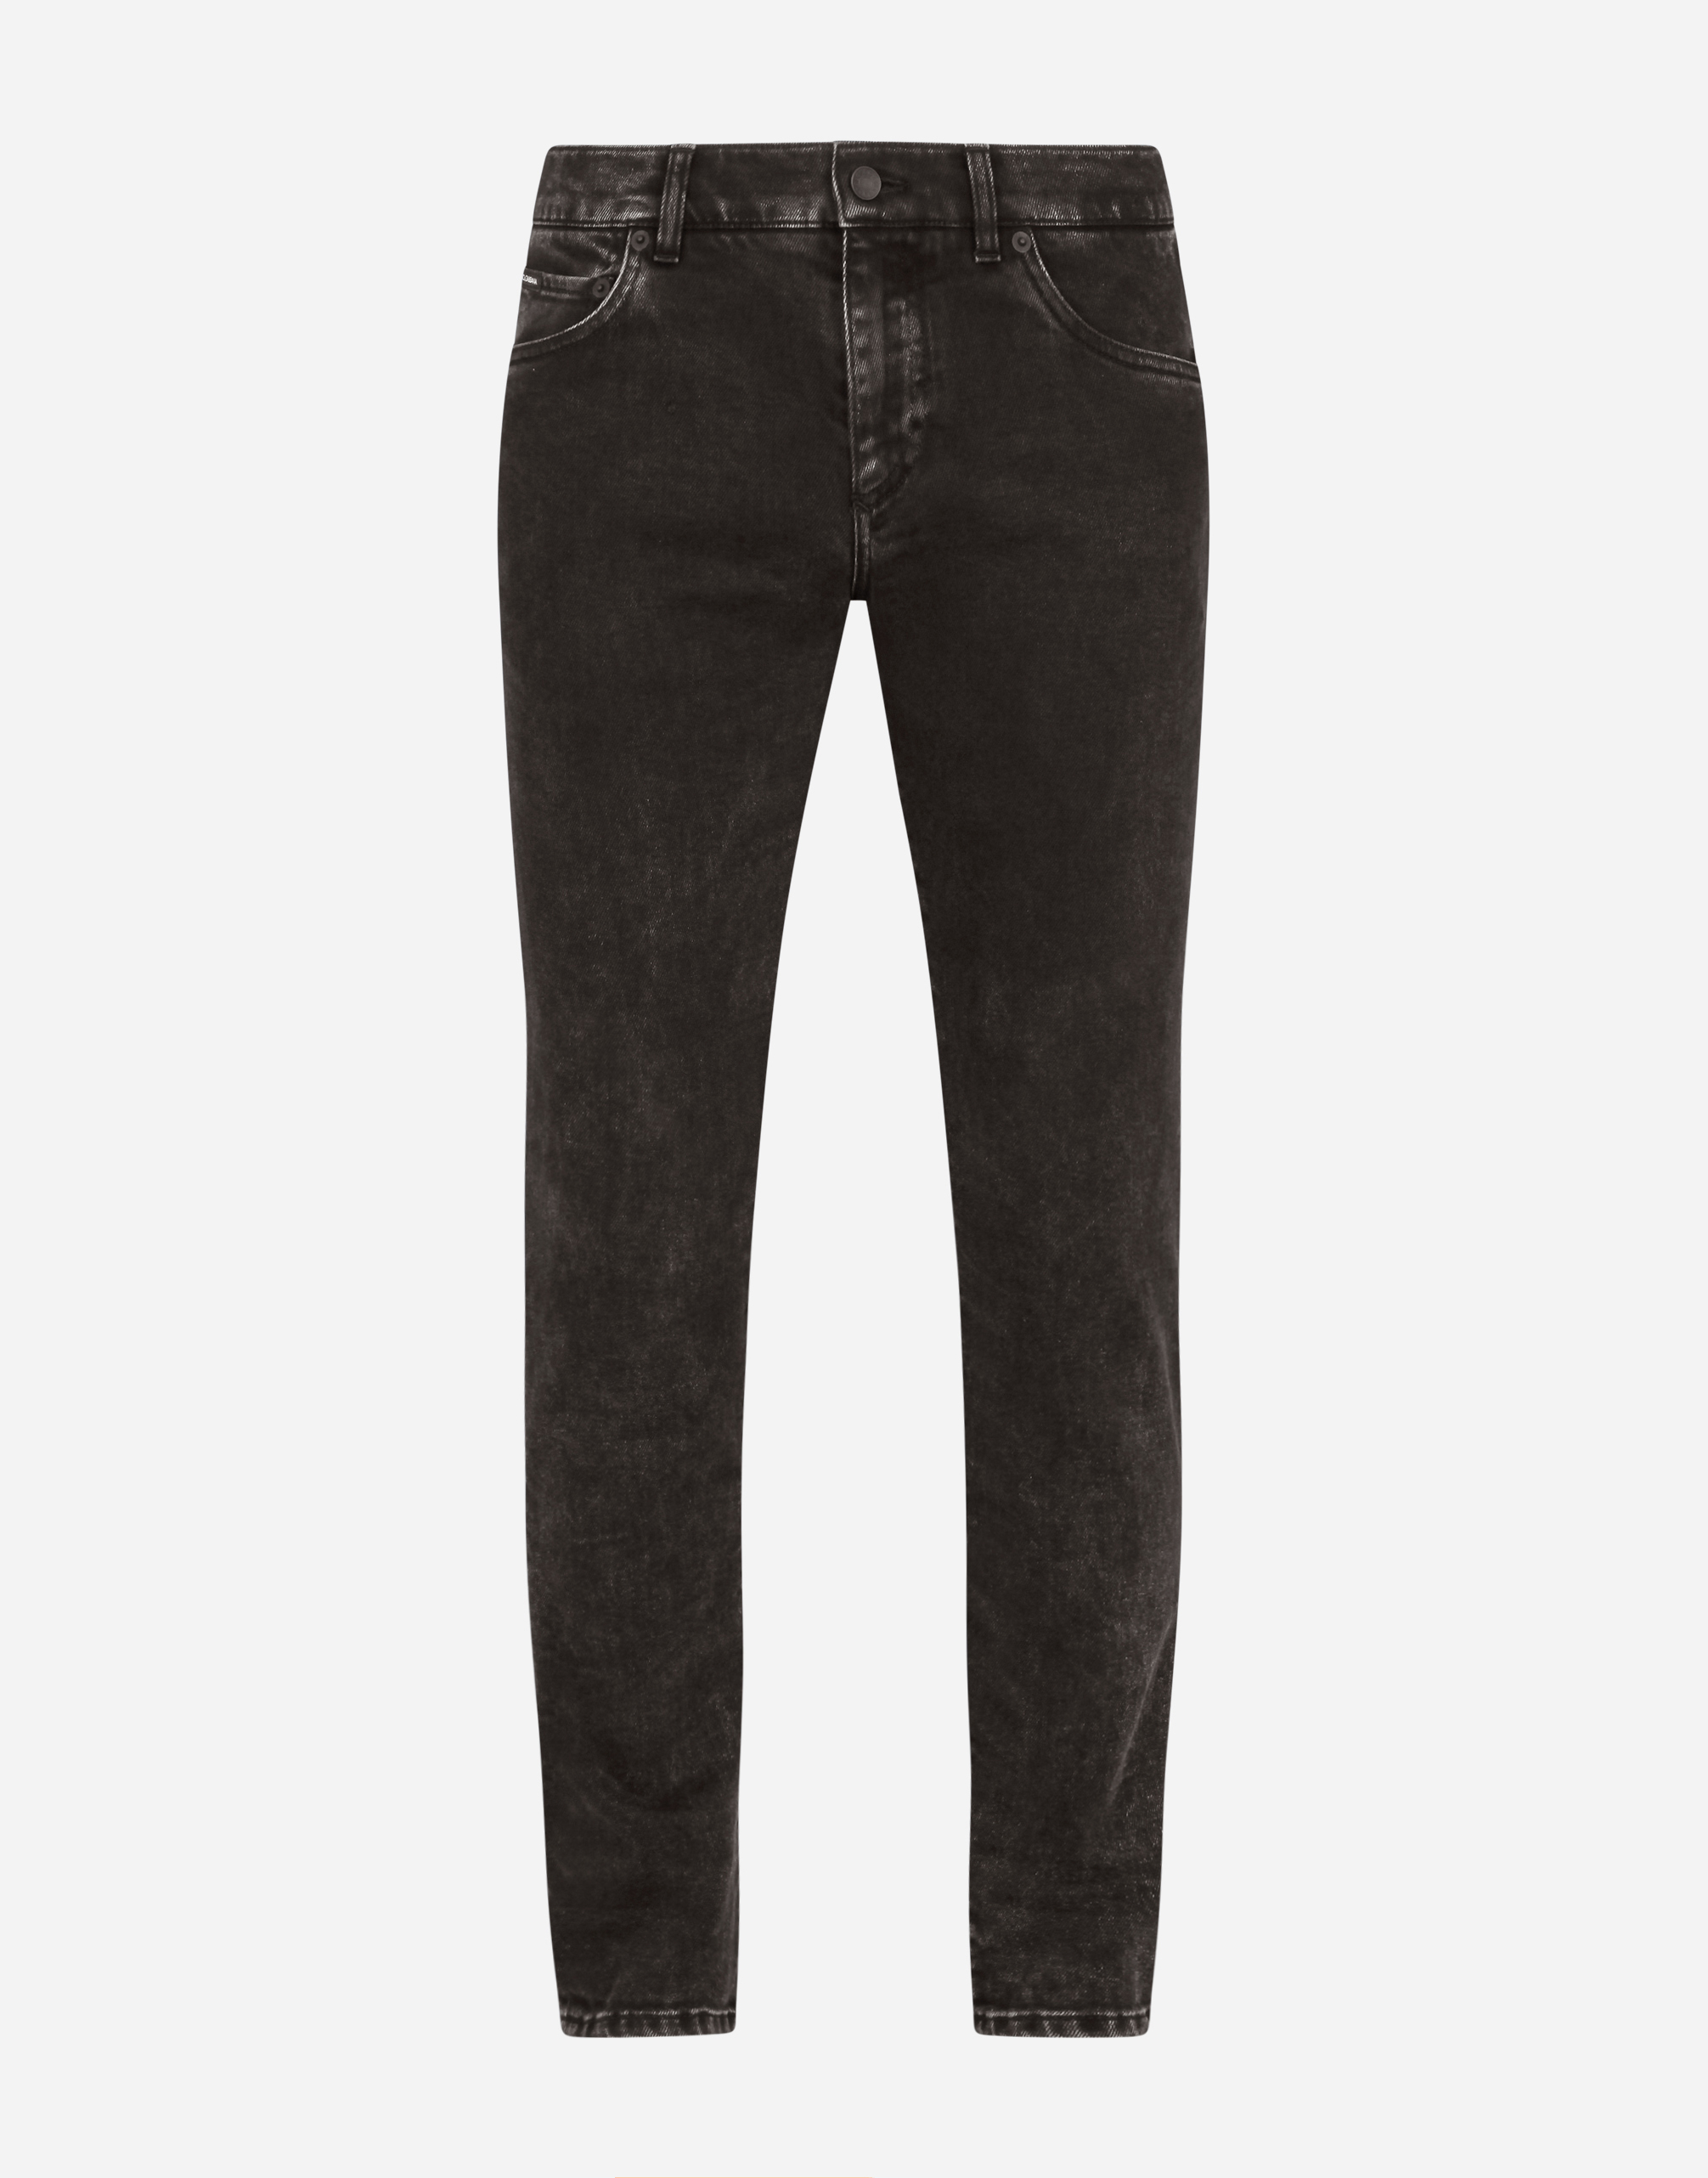 Washed black skinny stretch jeans with DG logo in Azure